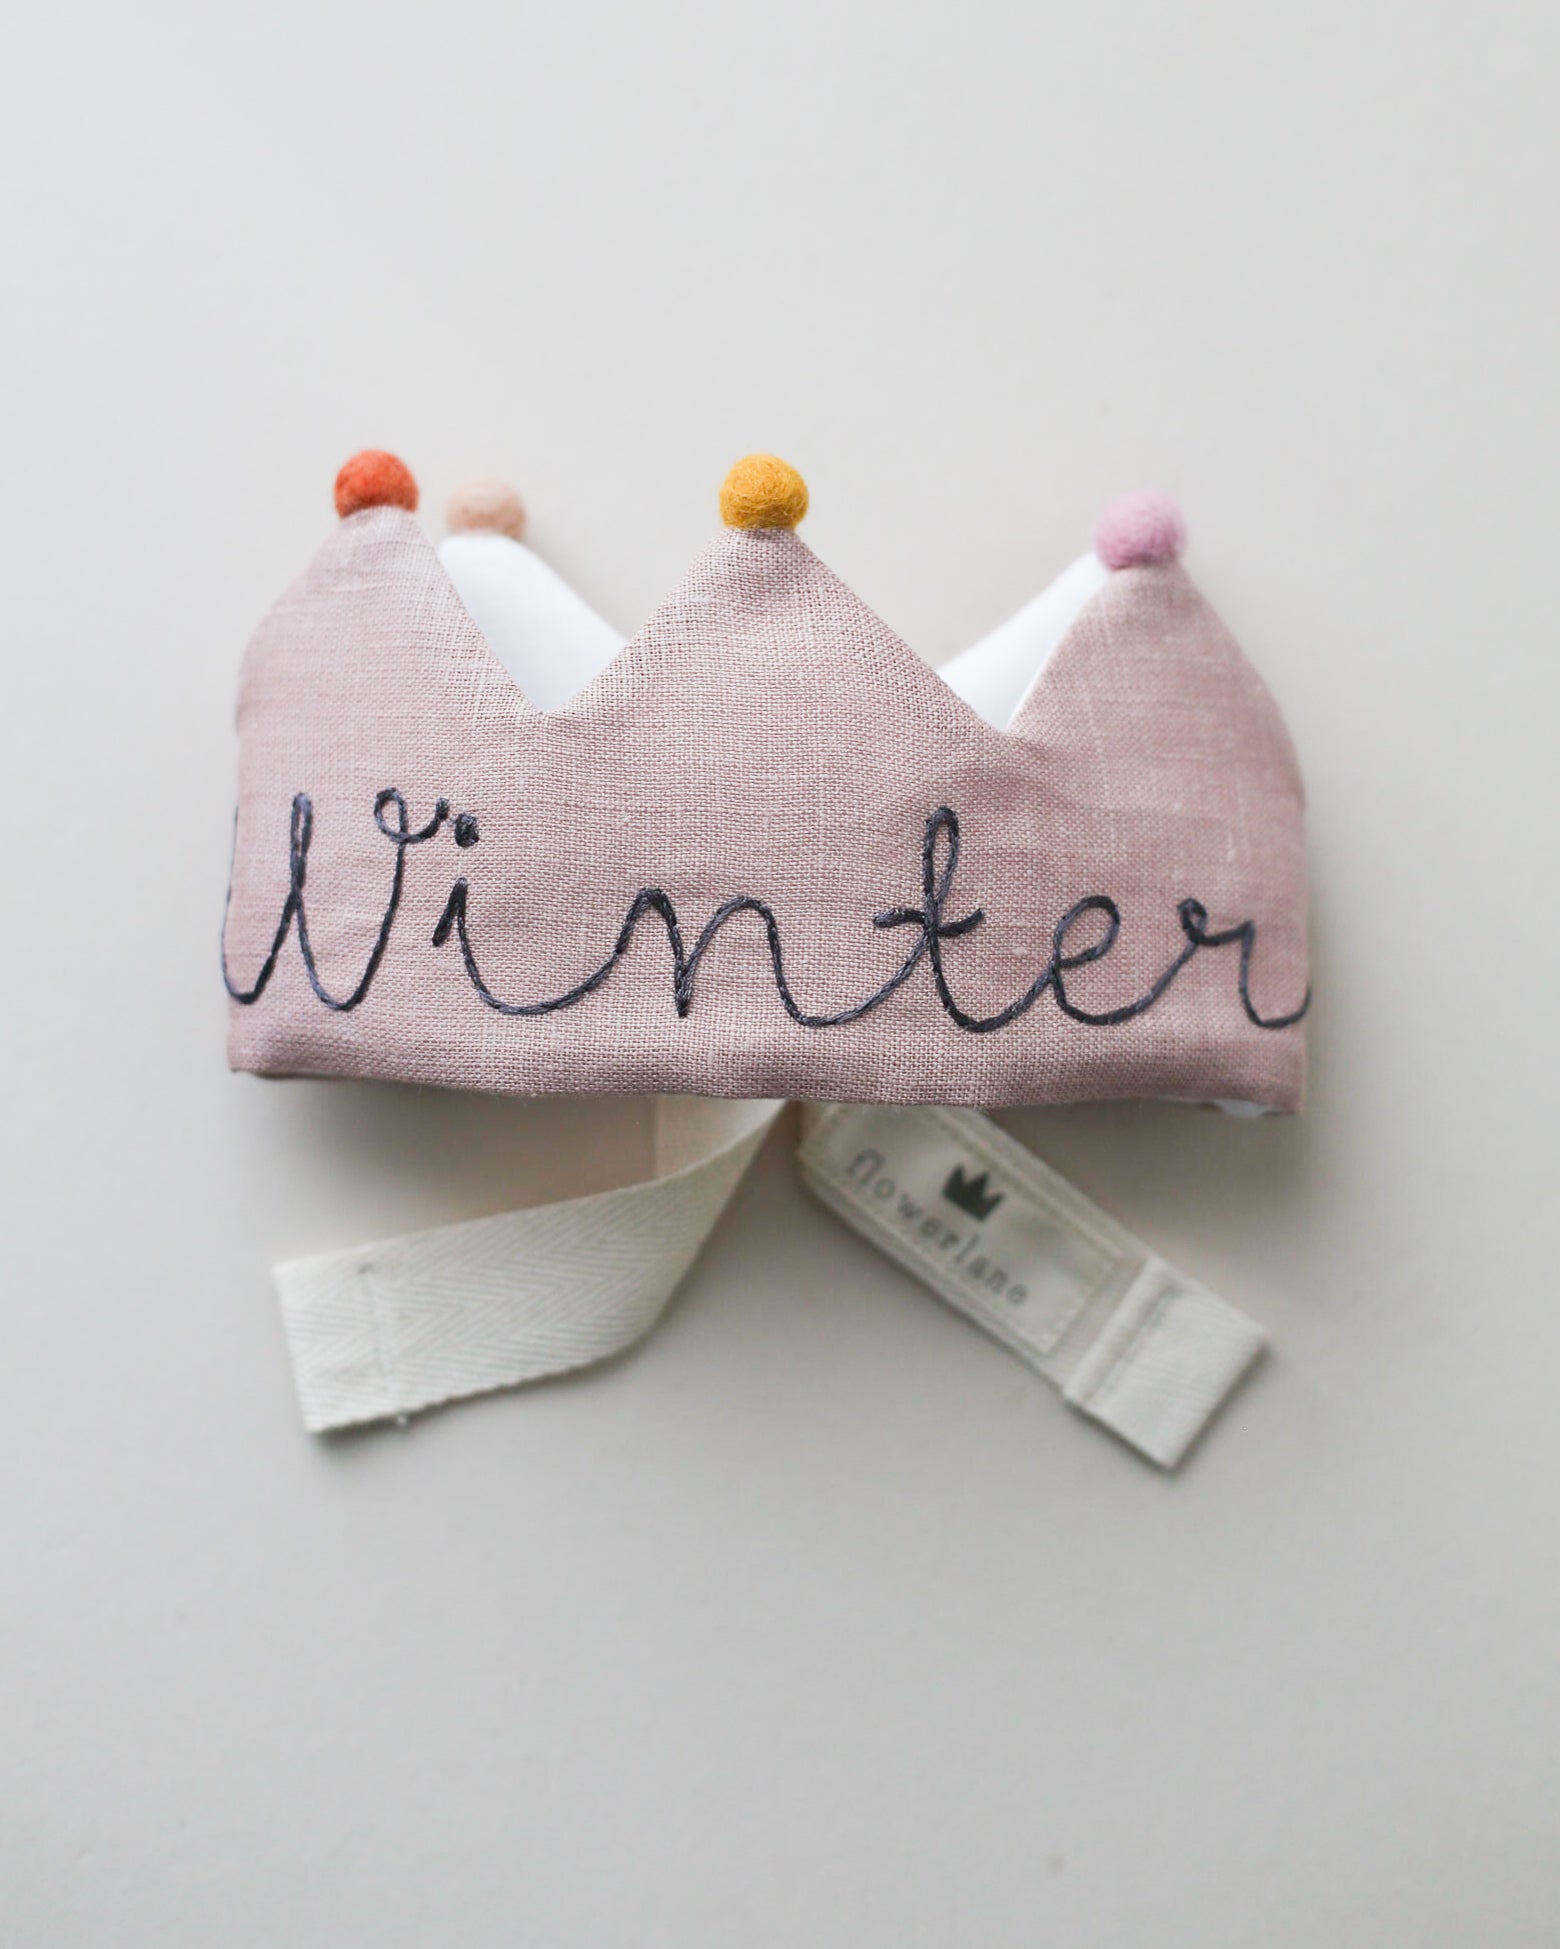 Handmade blush linen birthday crown with gray embroidery and felt pom poms